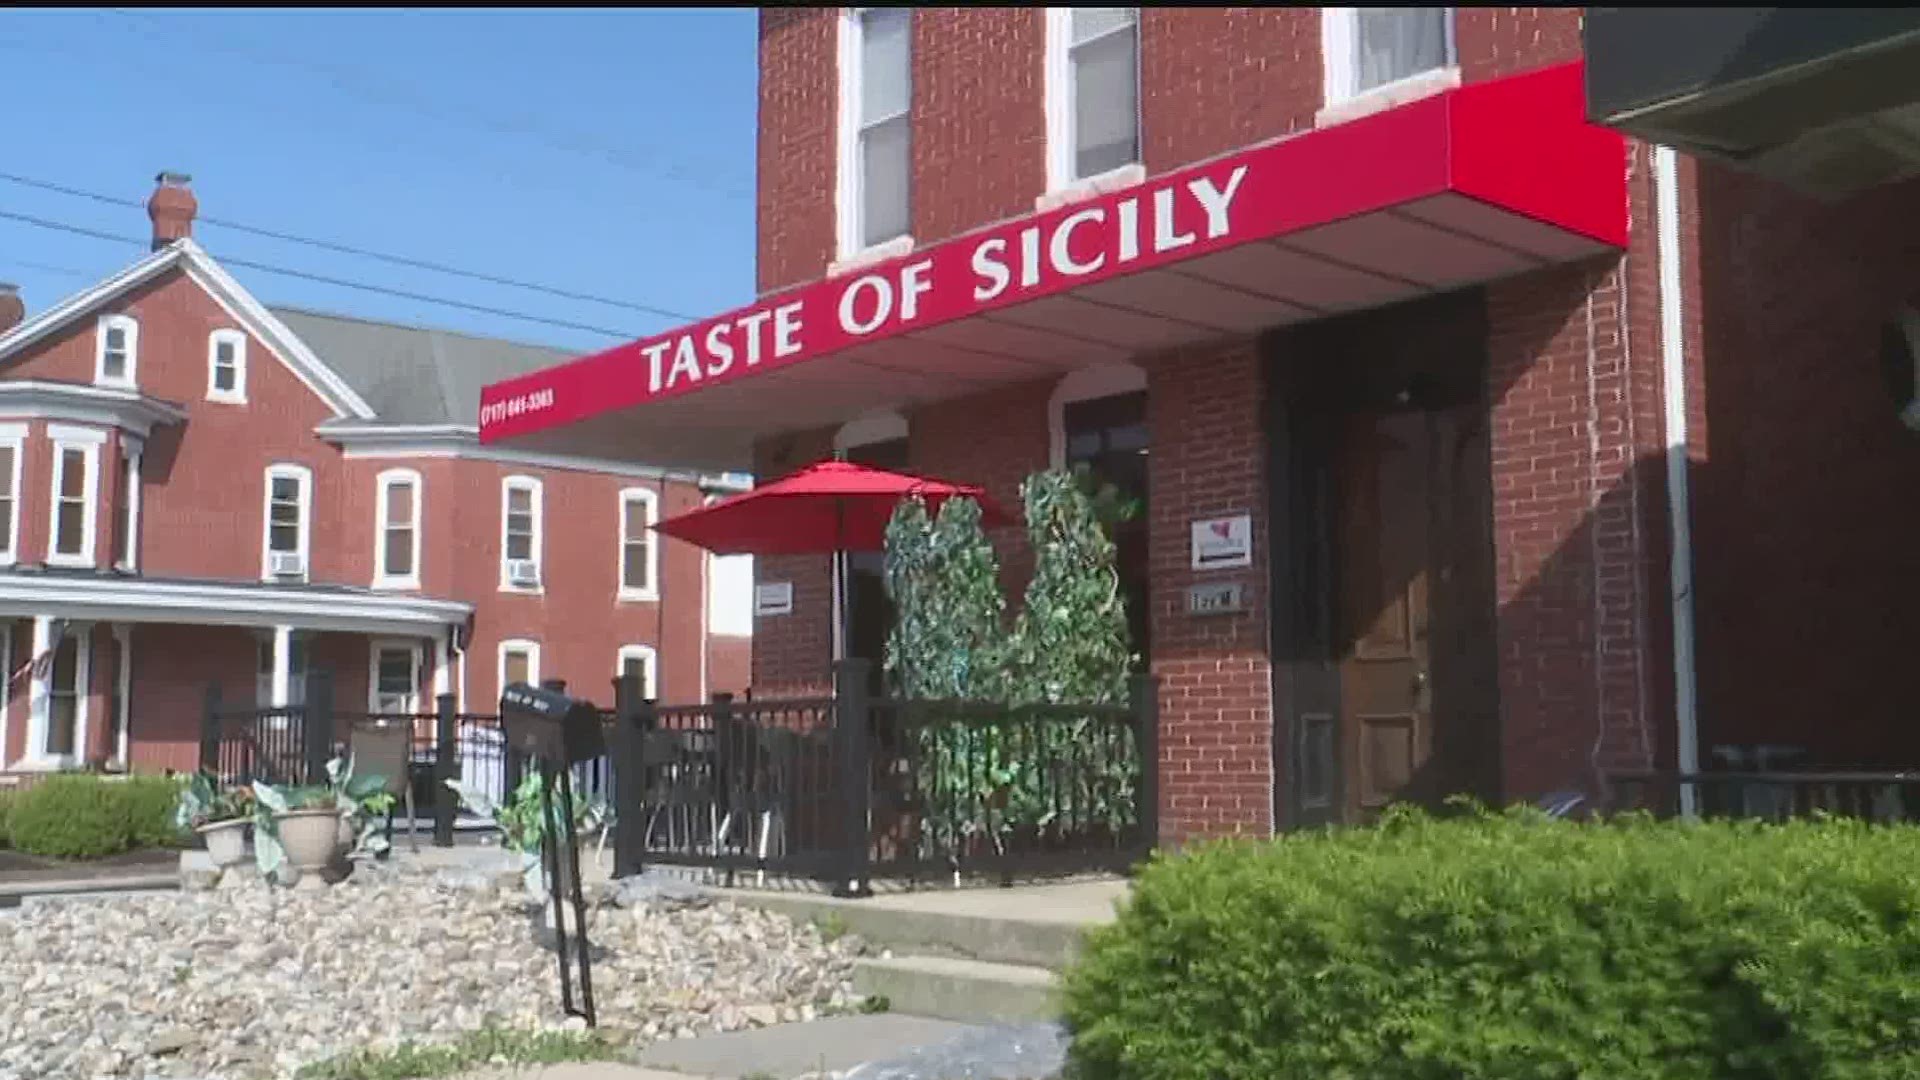 Taste of Sicily in Palmyra received a $1,000 fine Tuesday from the Pennsylvania Department of Agriculture for continuing to offer dine-in service.